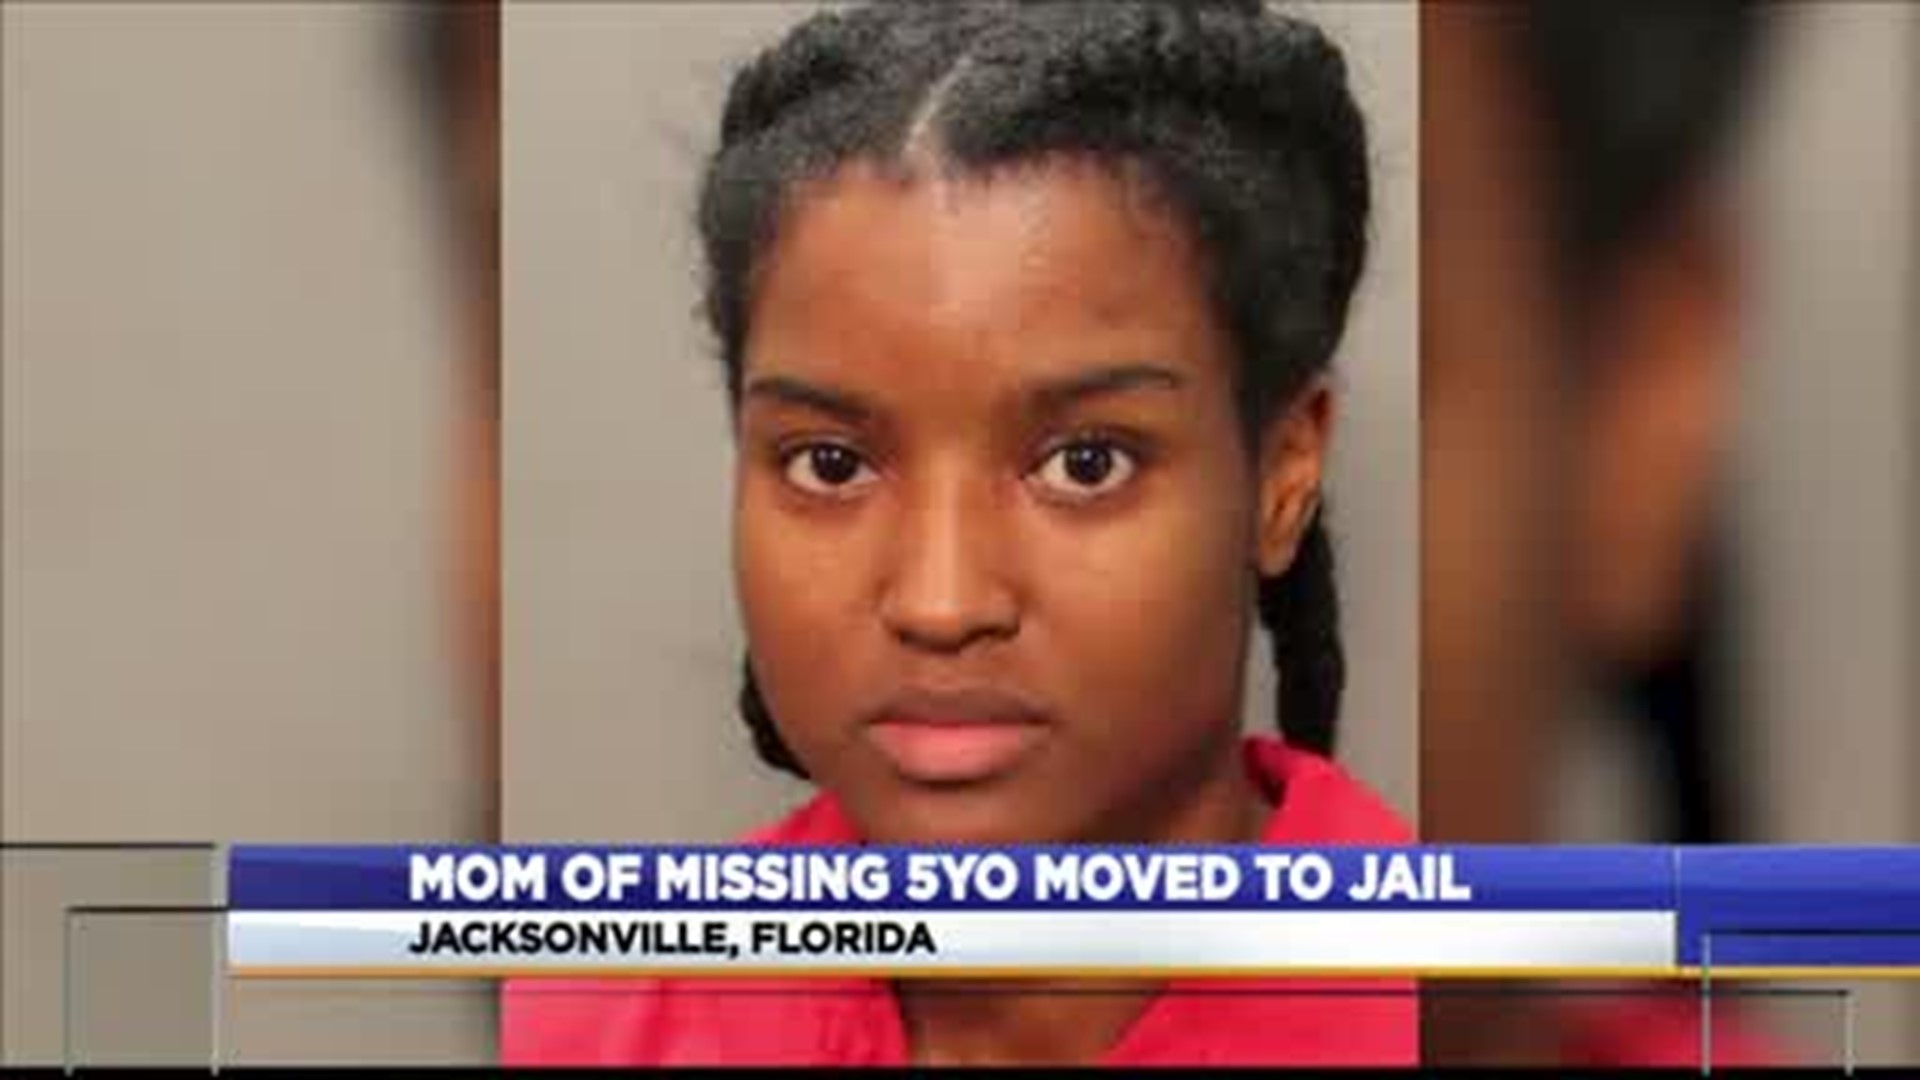 A Florida woman who authorities say tried to kill herself days after reporting her 5-year-old daughter missing earlier this month has been released from the hospital and booked into jail.